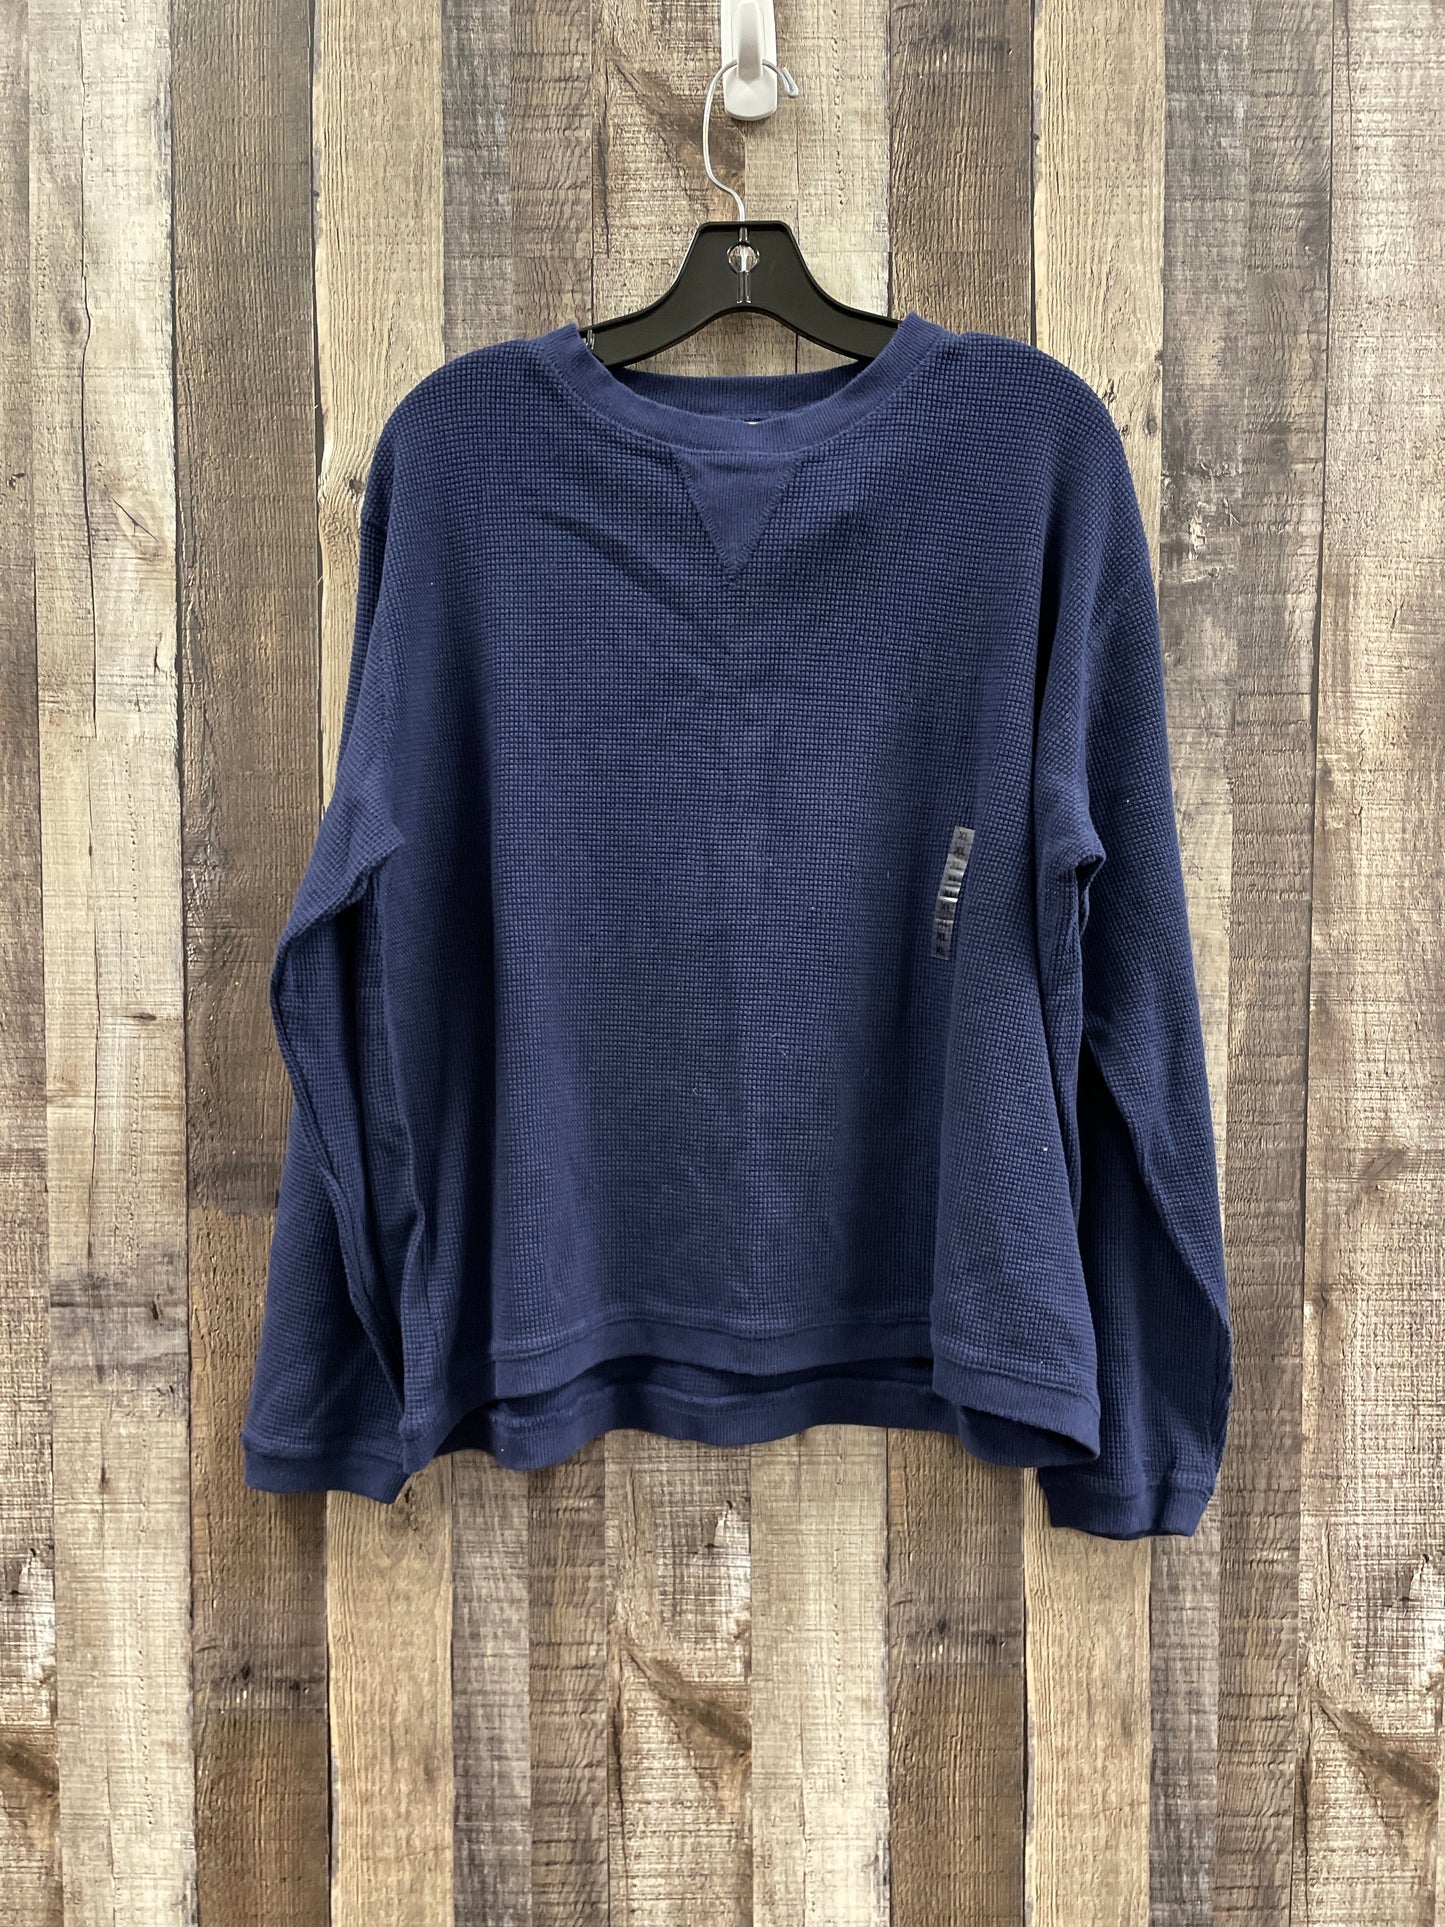 Top Long Sleeve Basic By Eddie Bauer  Size: Xl